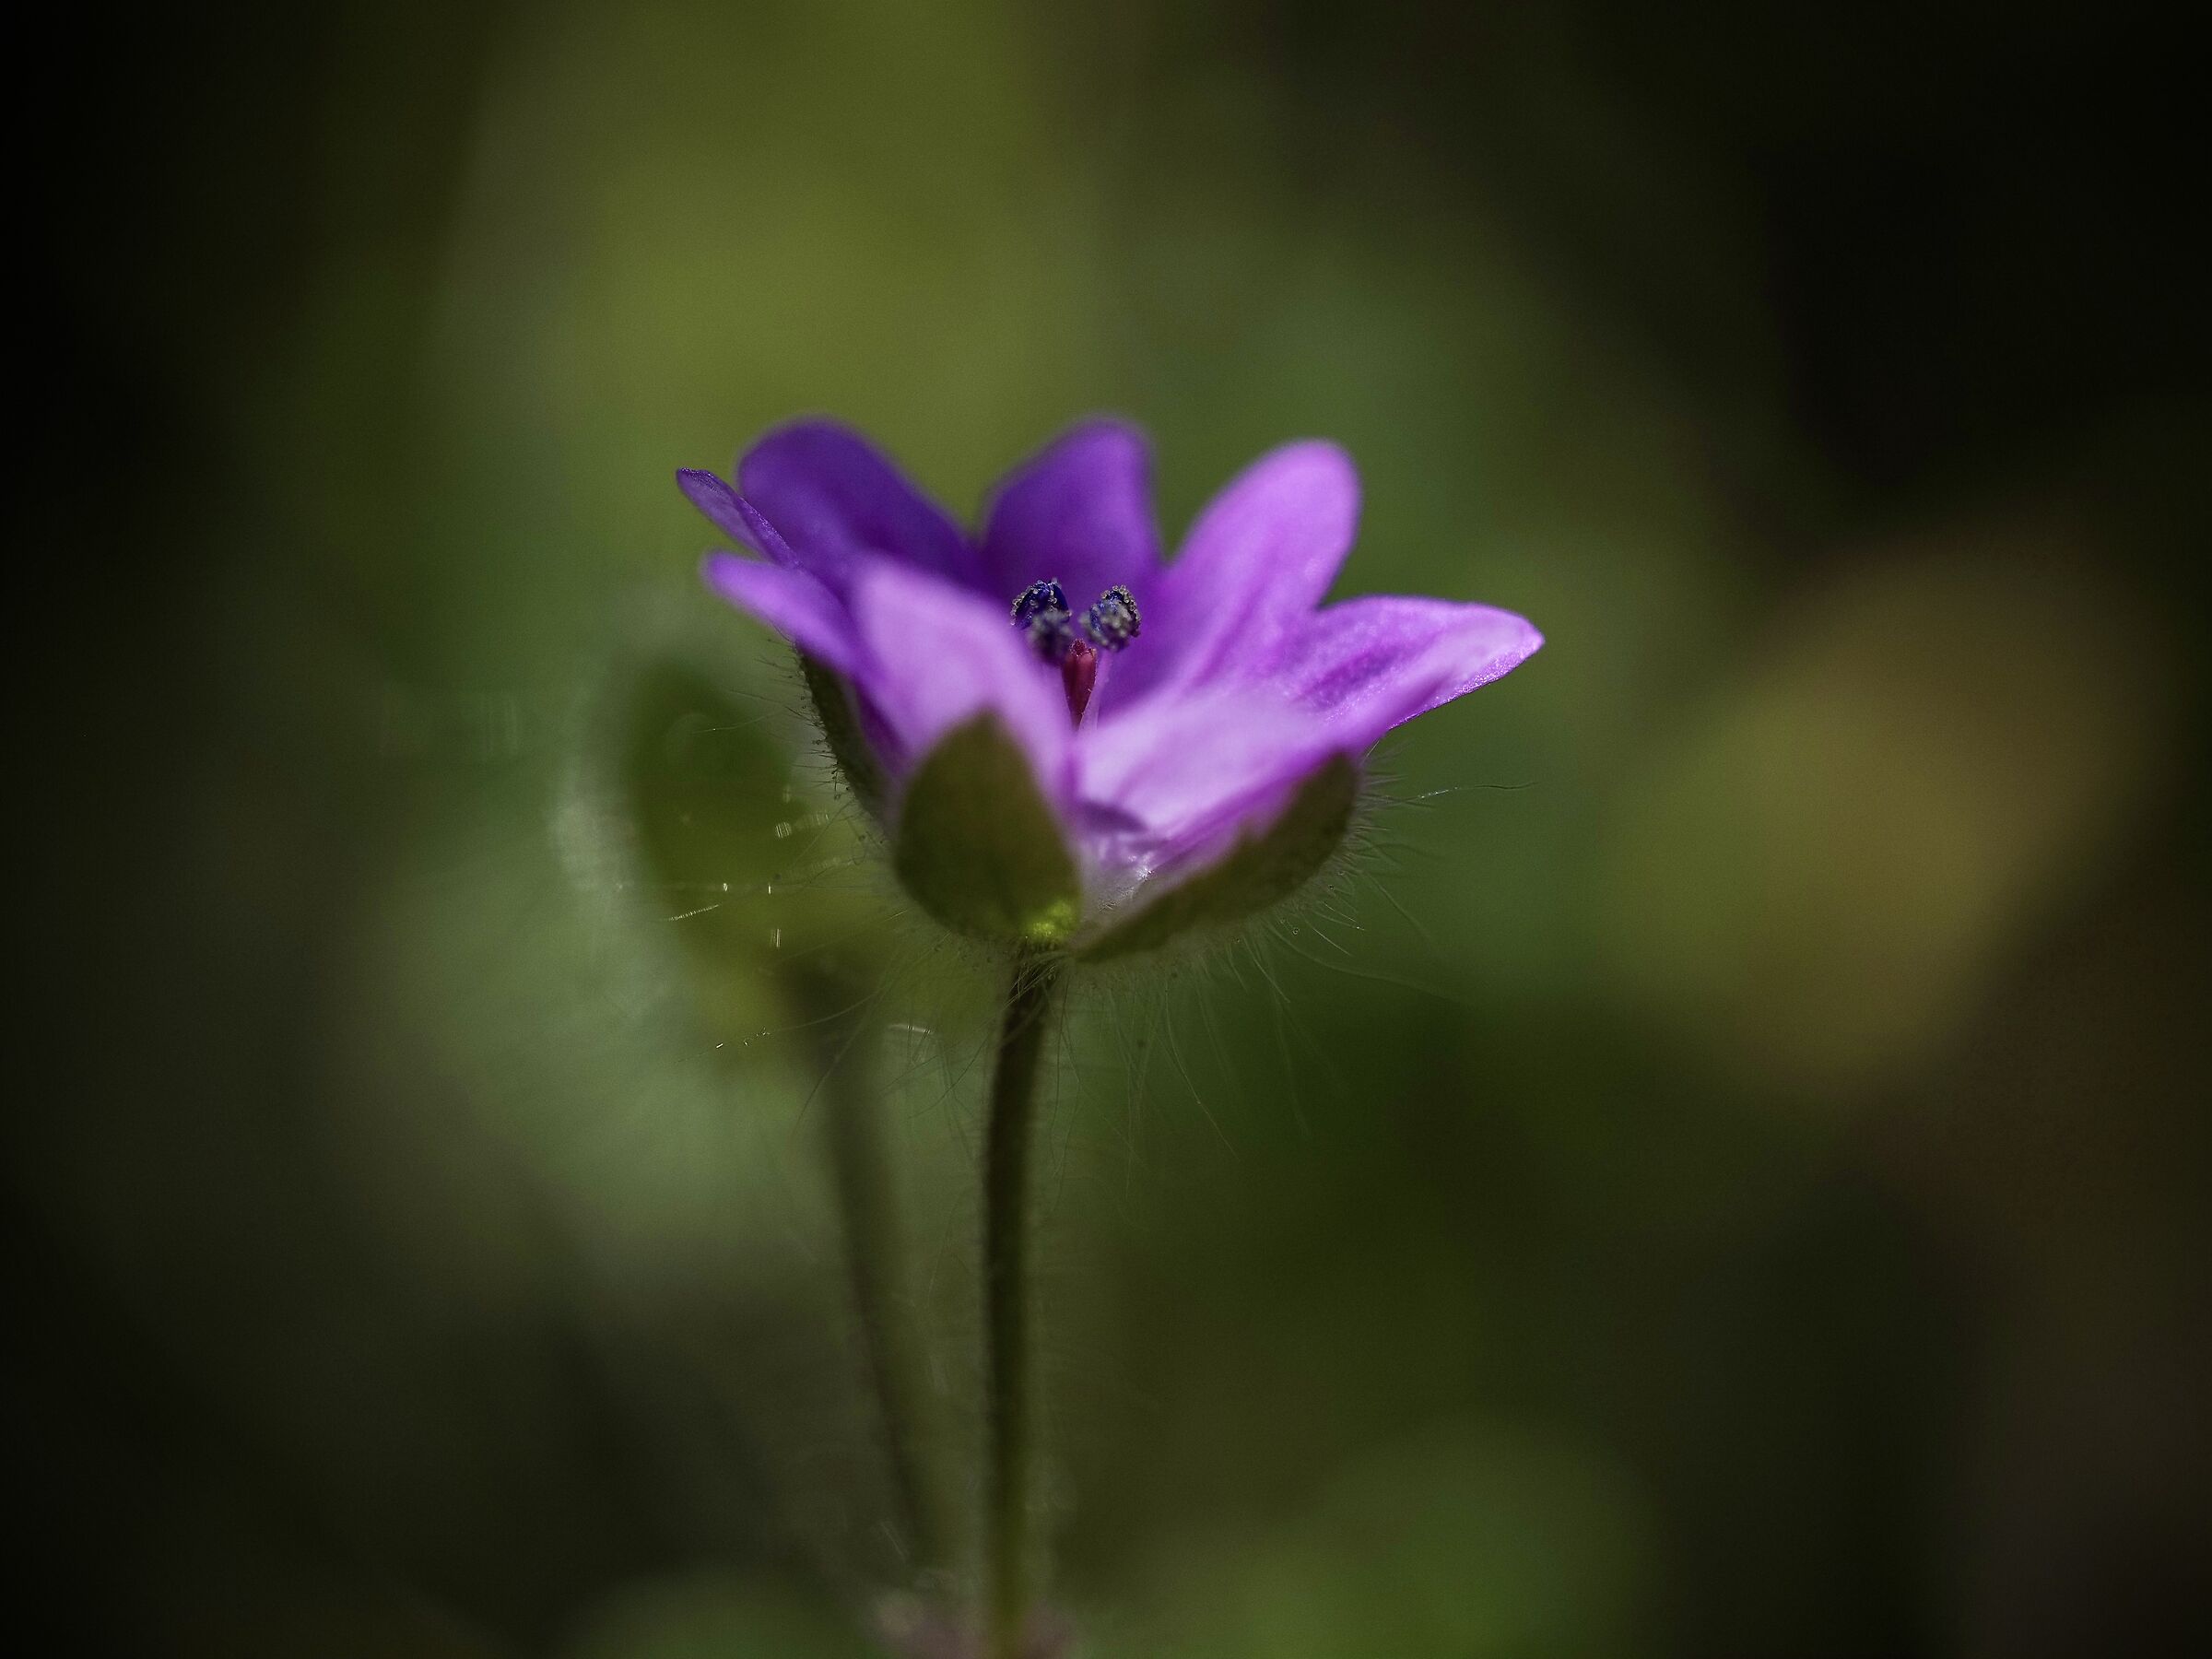 The beauty of a simple wildflower...